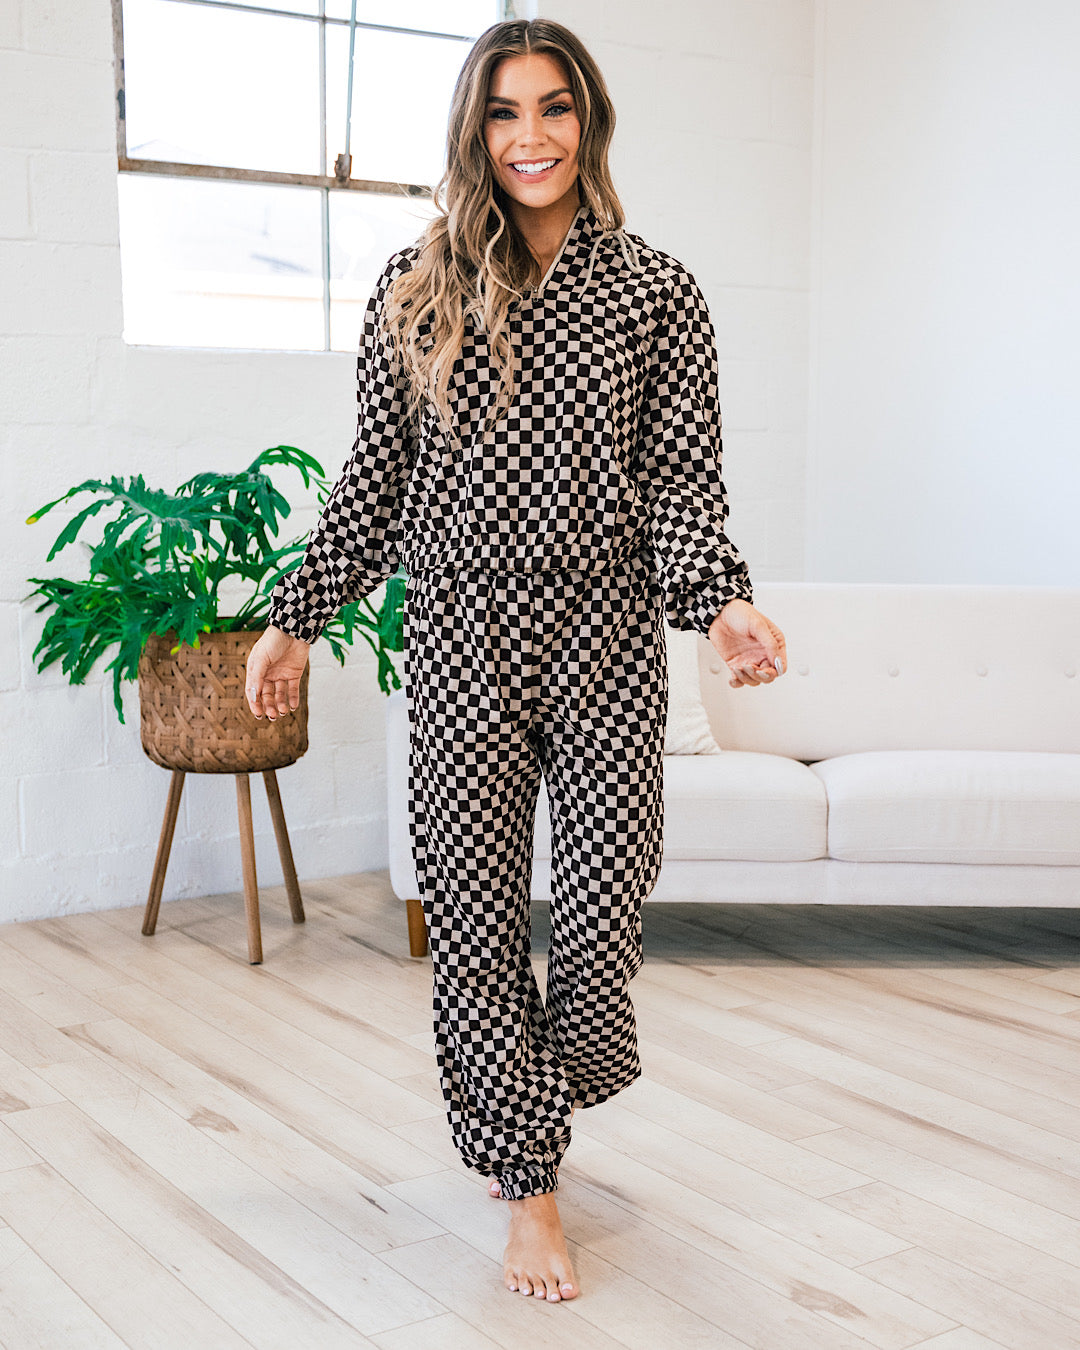 NEW! You Got Me Checkered Joggers  Ces Femme   